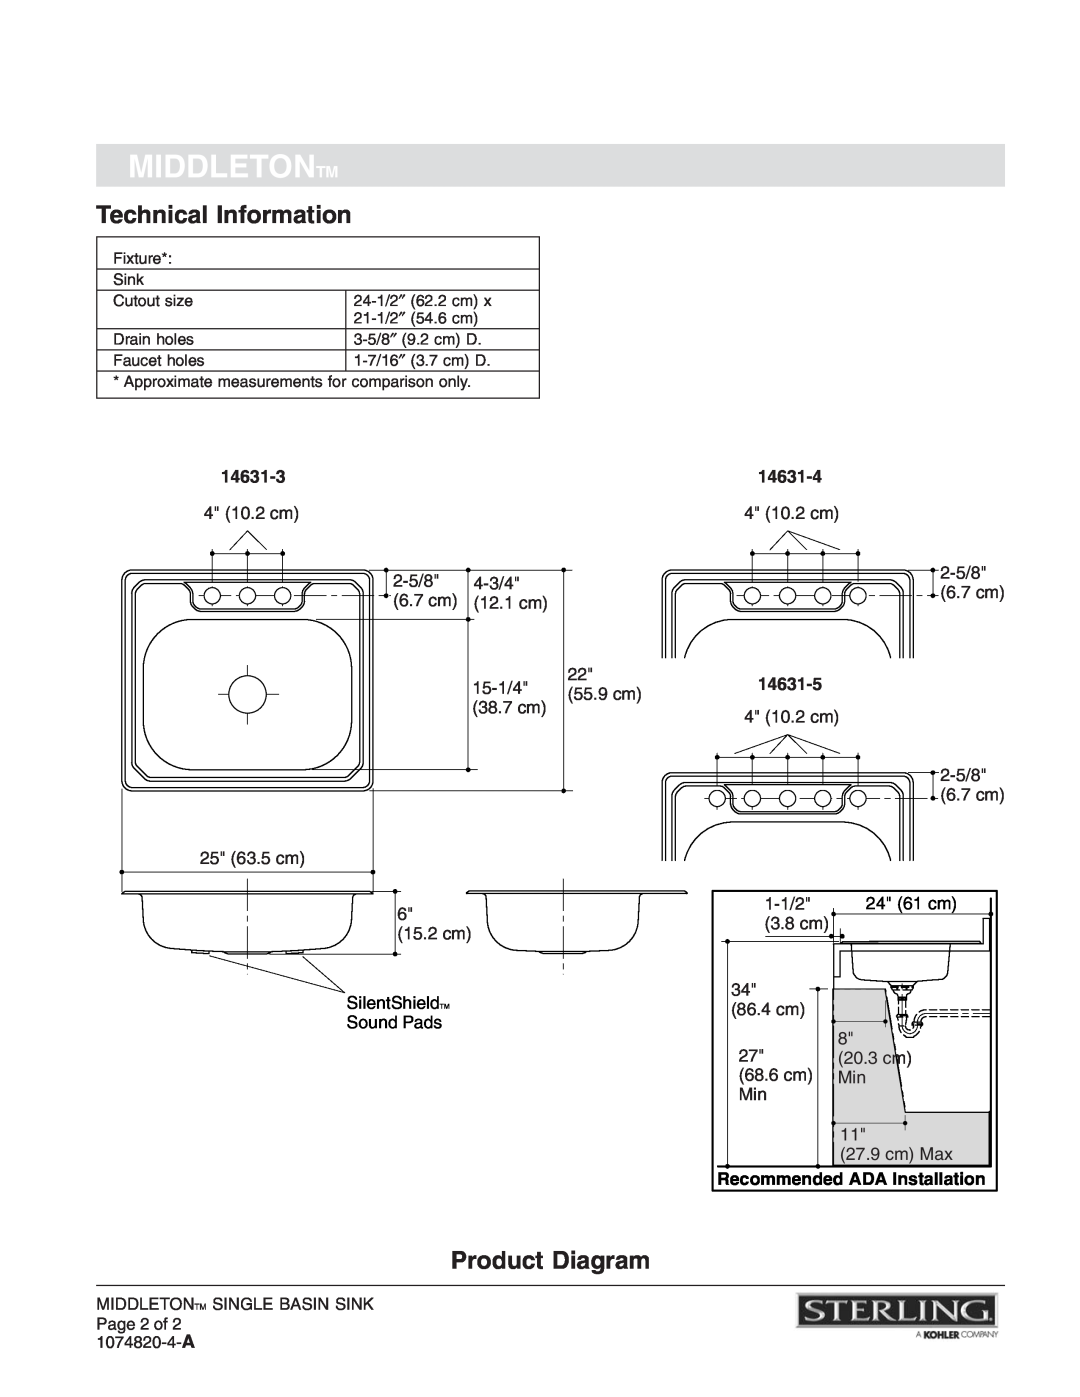 Sterling Plumbing Technical Information, Product Diagram, Middletontm, 14631-3, 14631-4, 14631-5 